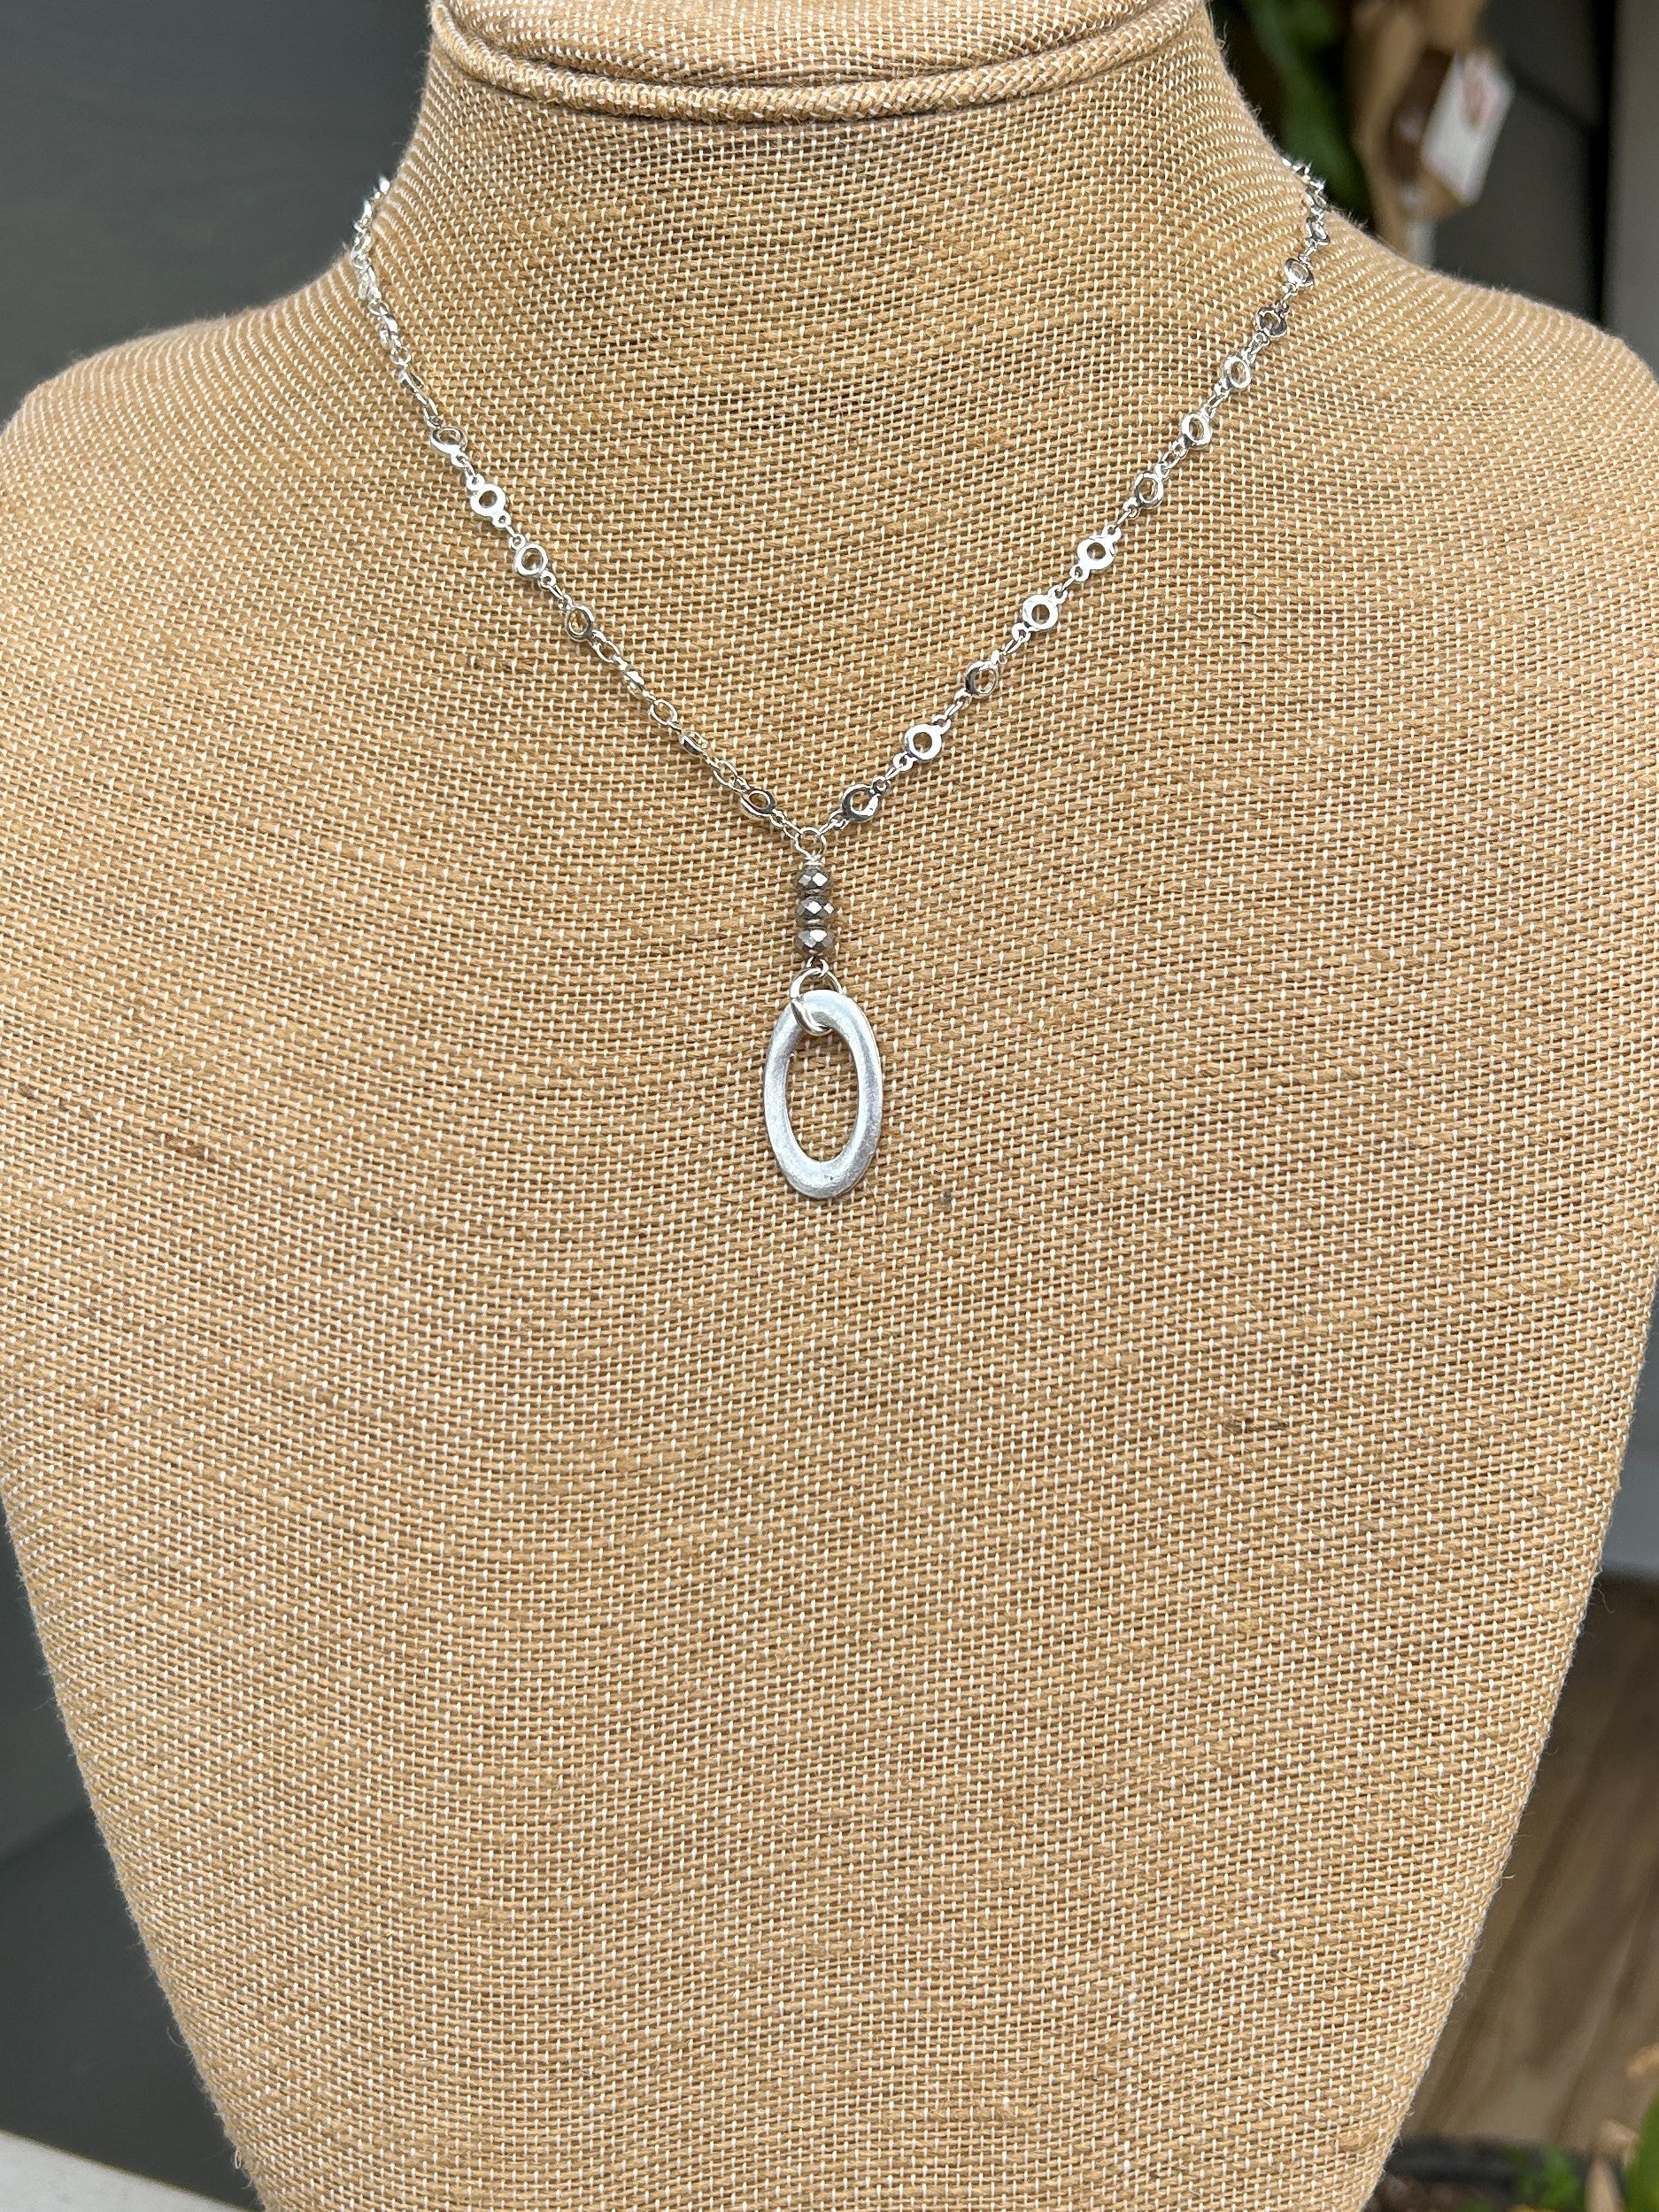 Unique Chain Necklace with Oval Drop